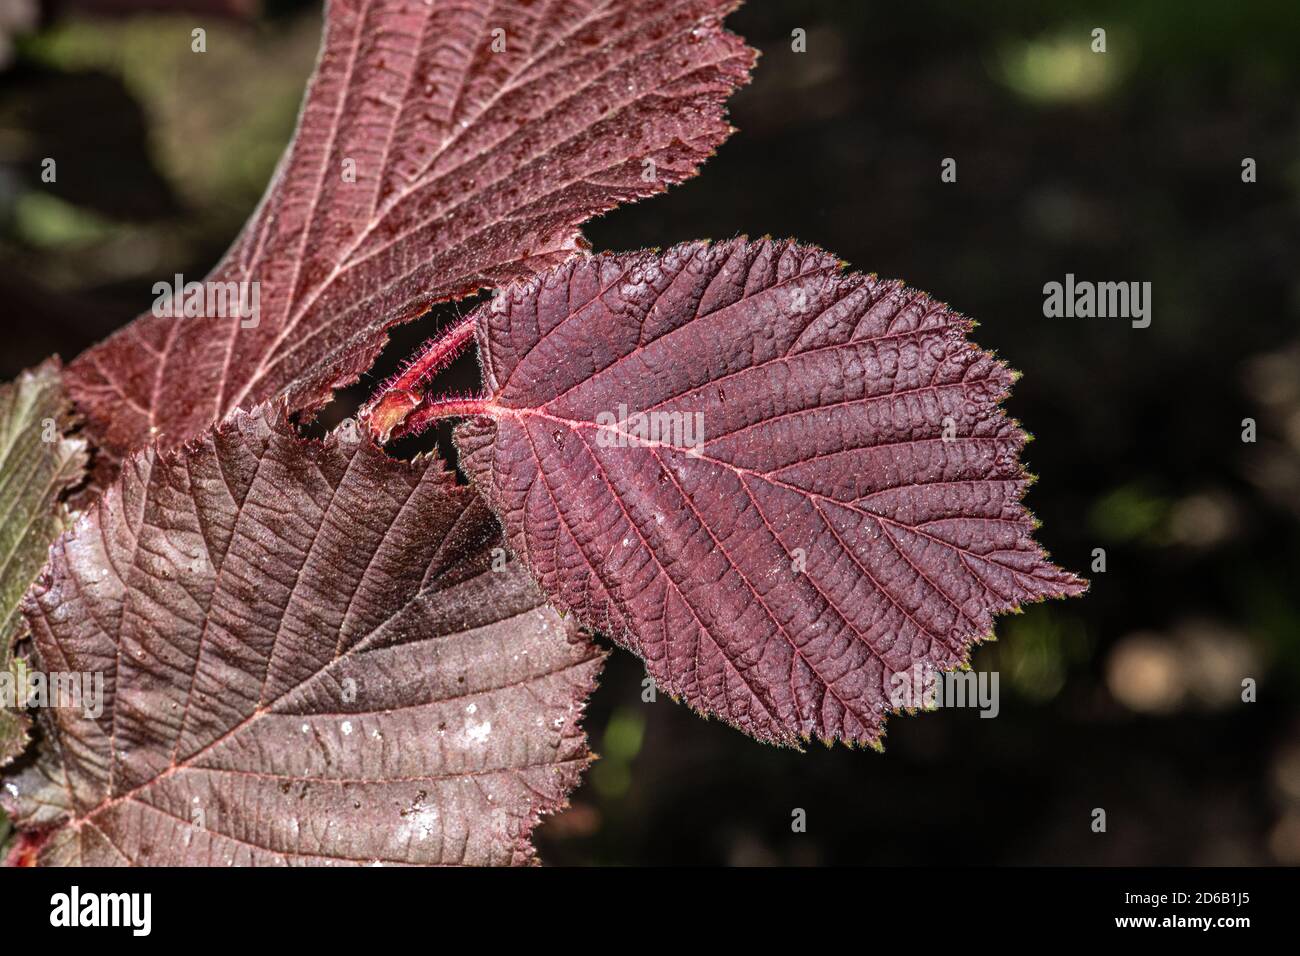 Leaves of Red Leaf Filbert (Corylus maxima 'Rote Zeller') Stock Photo